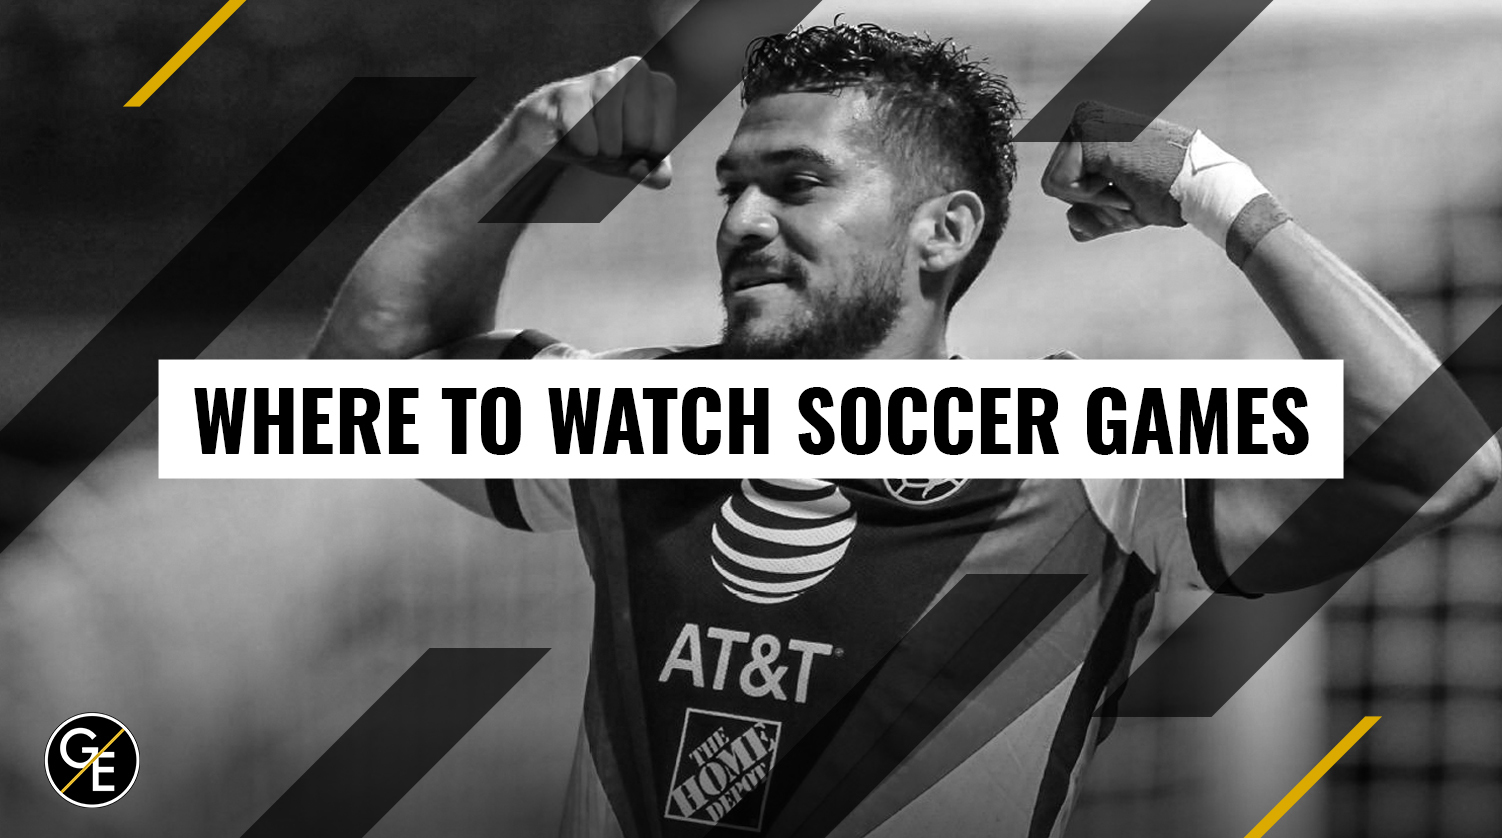 Where to watch soccer games